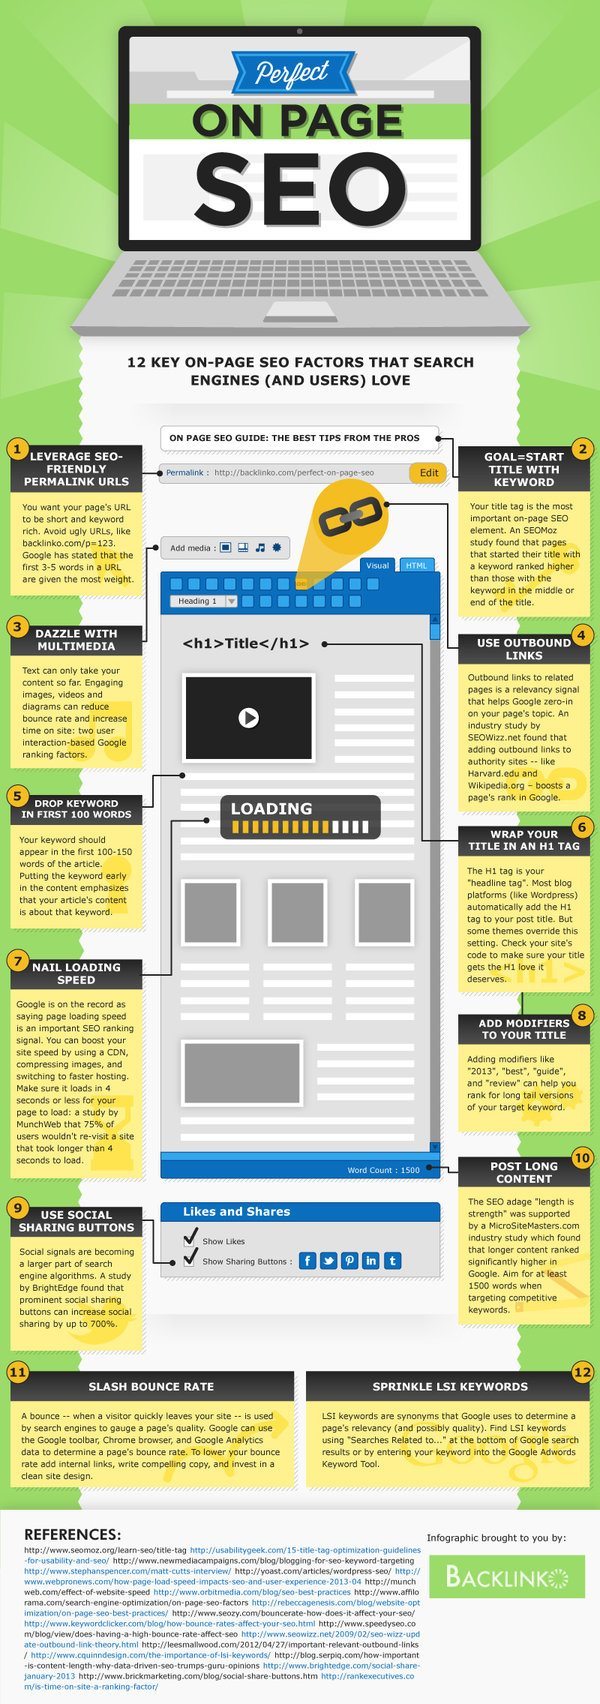 On-page SEO infographic